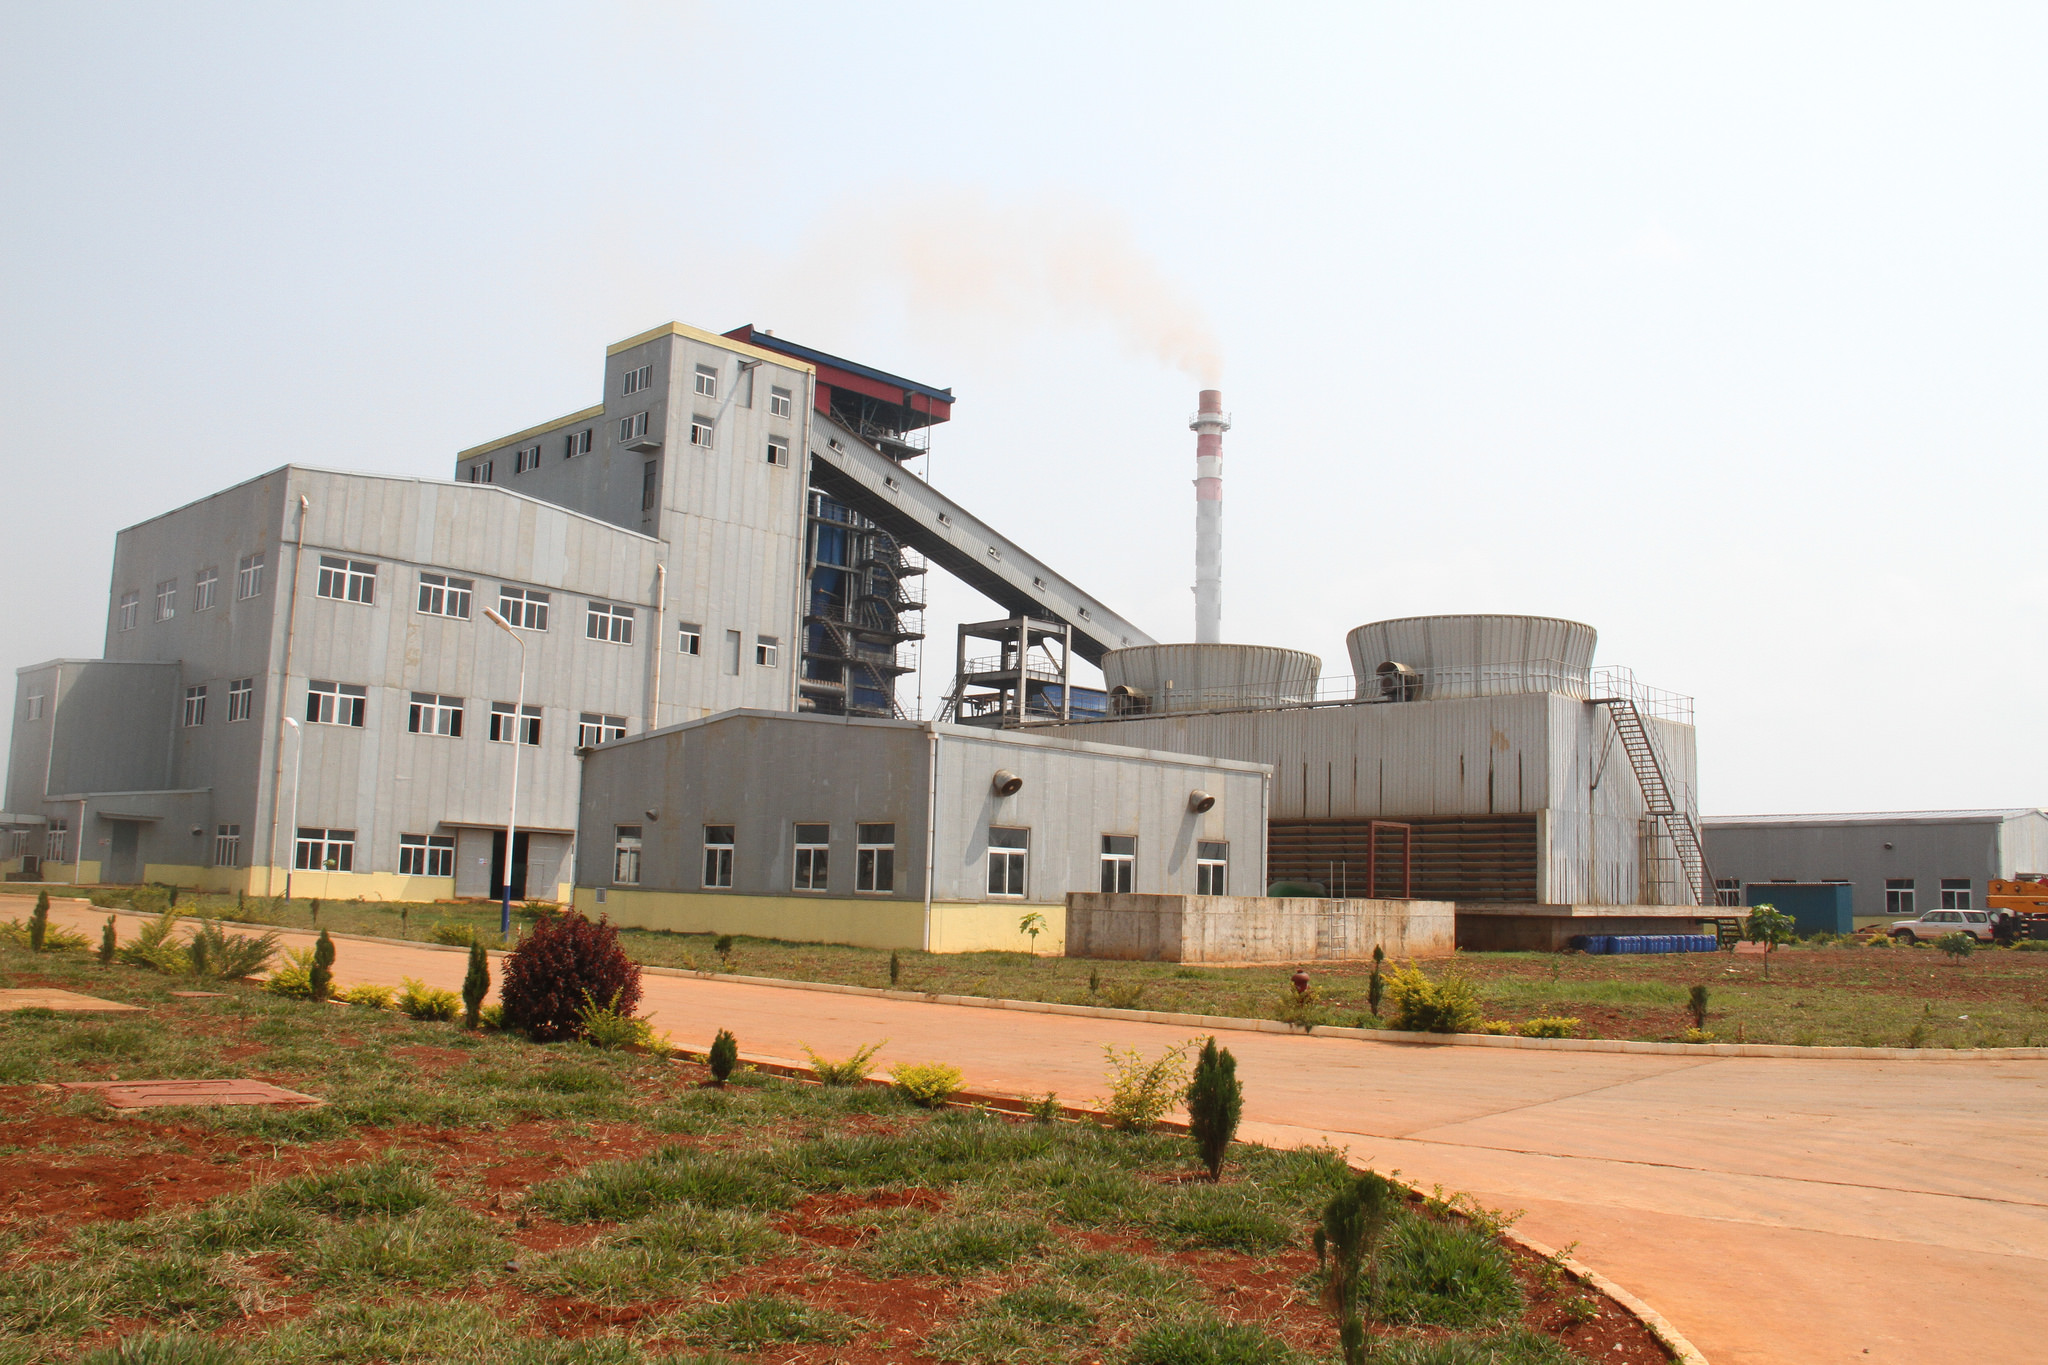 Gishoma 15 MW Peat to Power Project